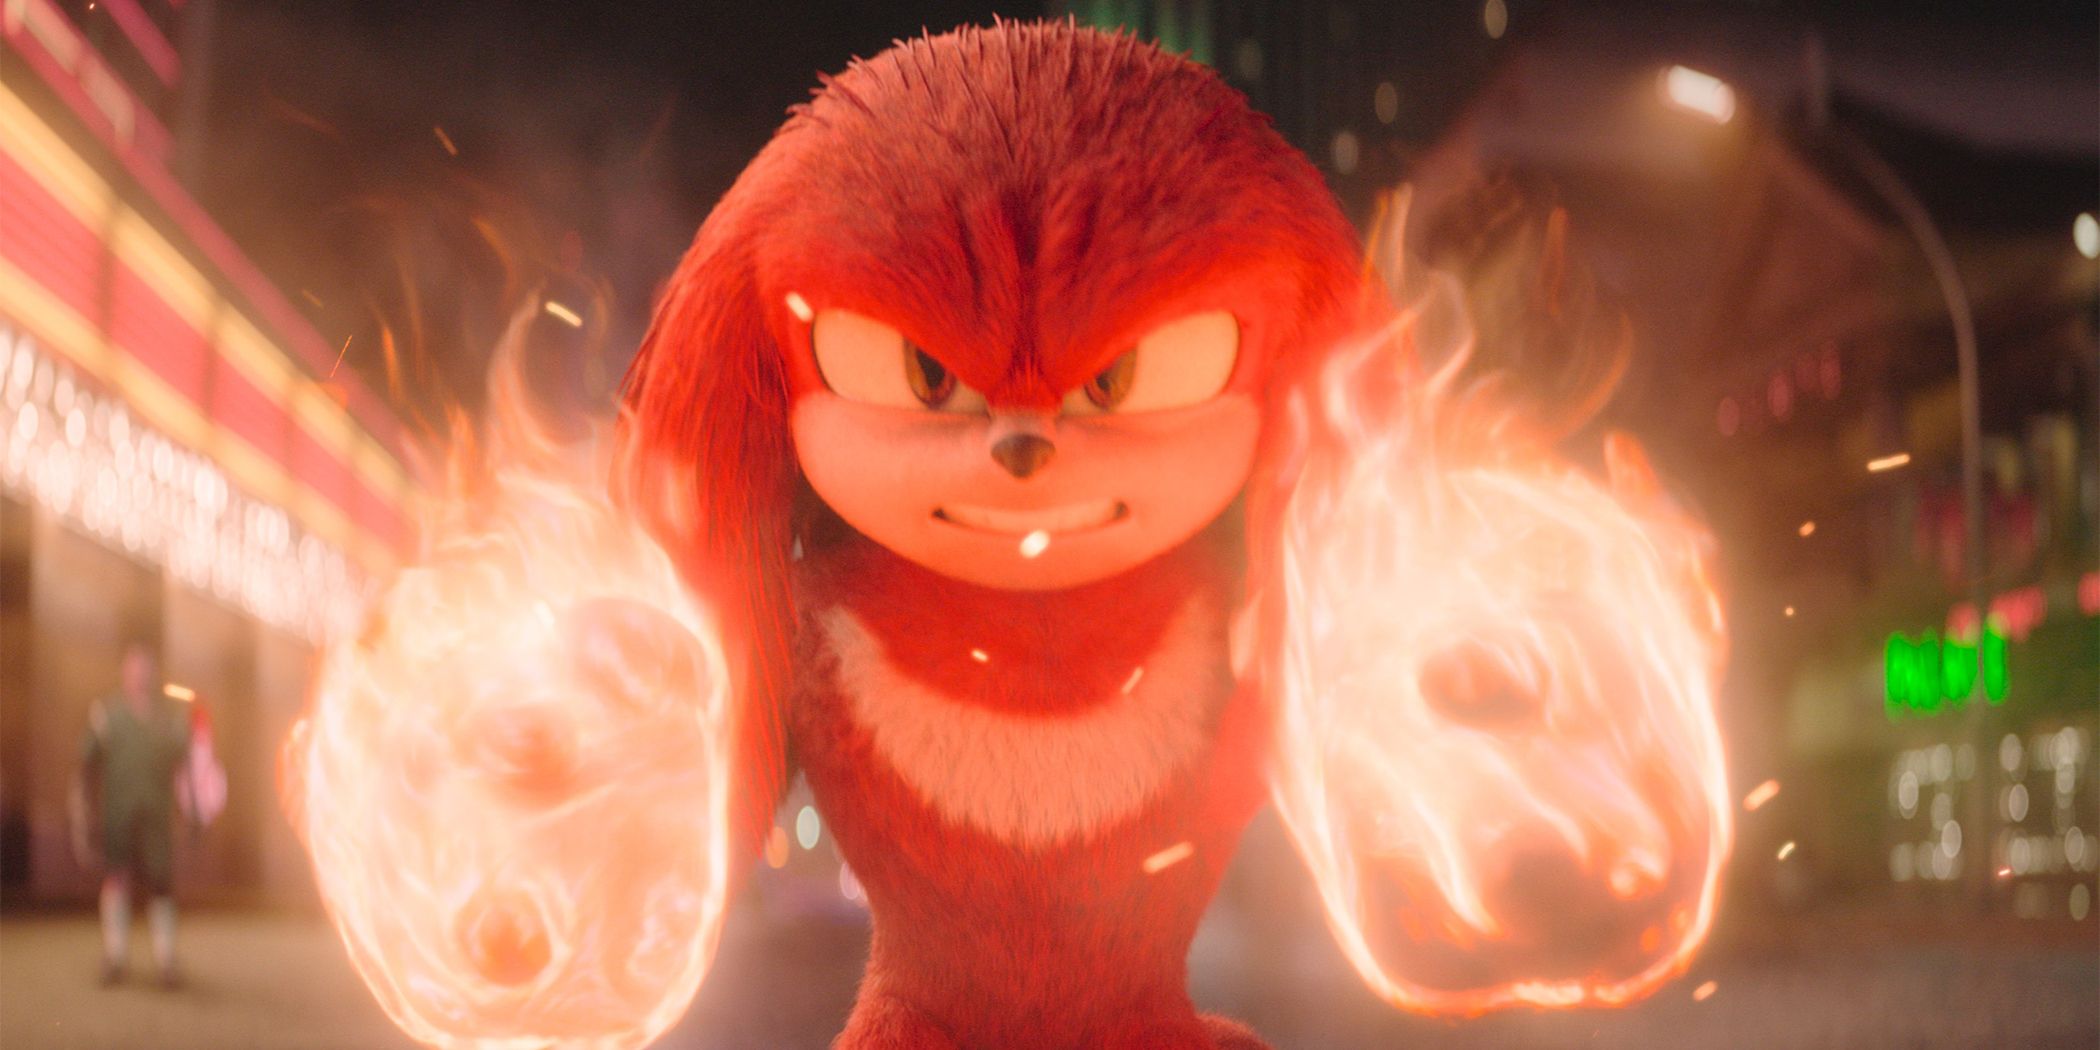 Knuckles scowling with both his fists engulfed in flames on a city street